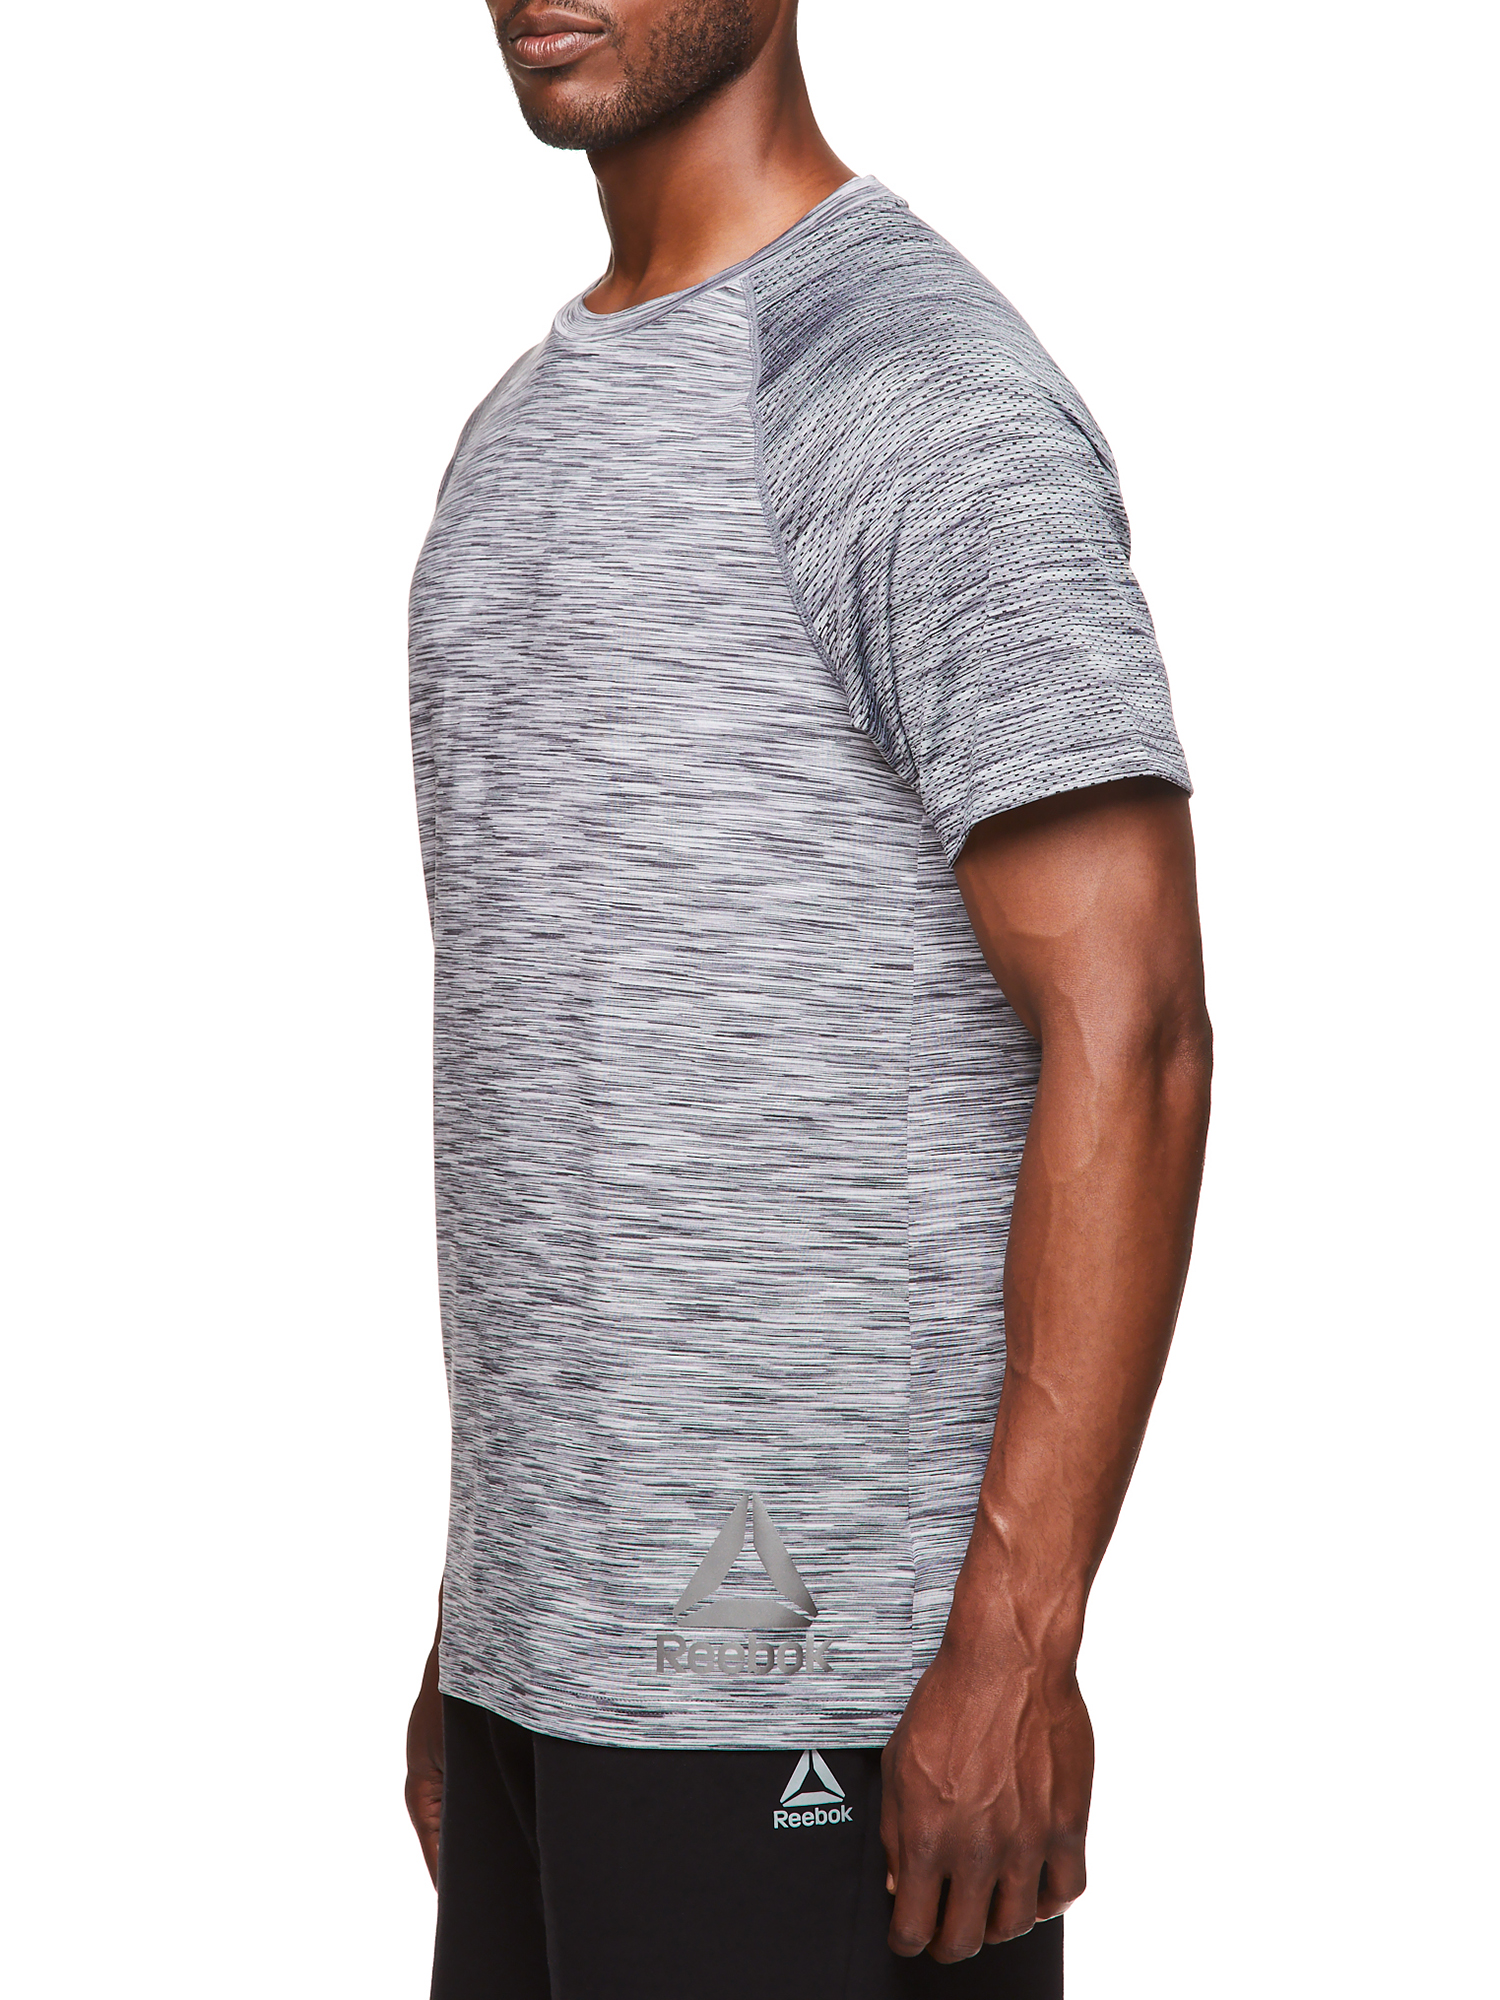 Reebok Men's and Big Men's Active Short Sleeve Tee with Mesh Sleeves, up to Size 3XL - image 4 of 4